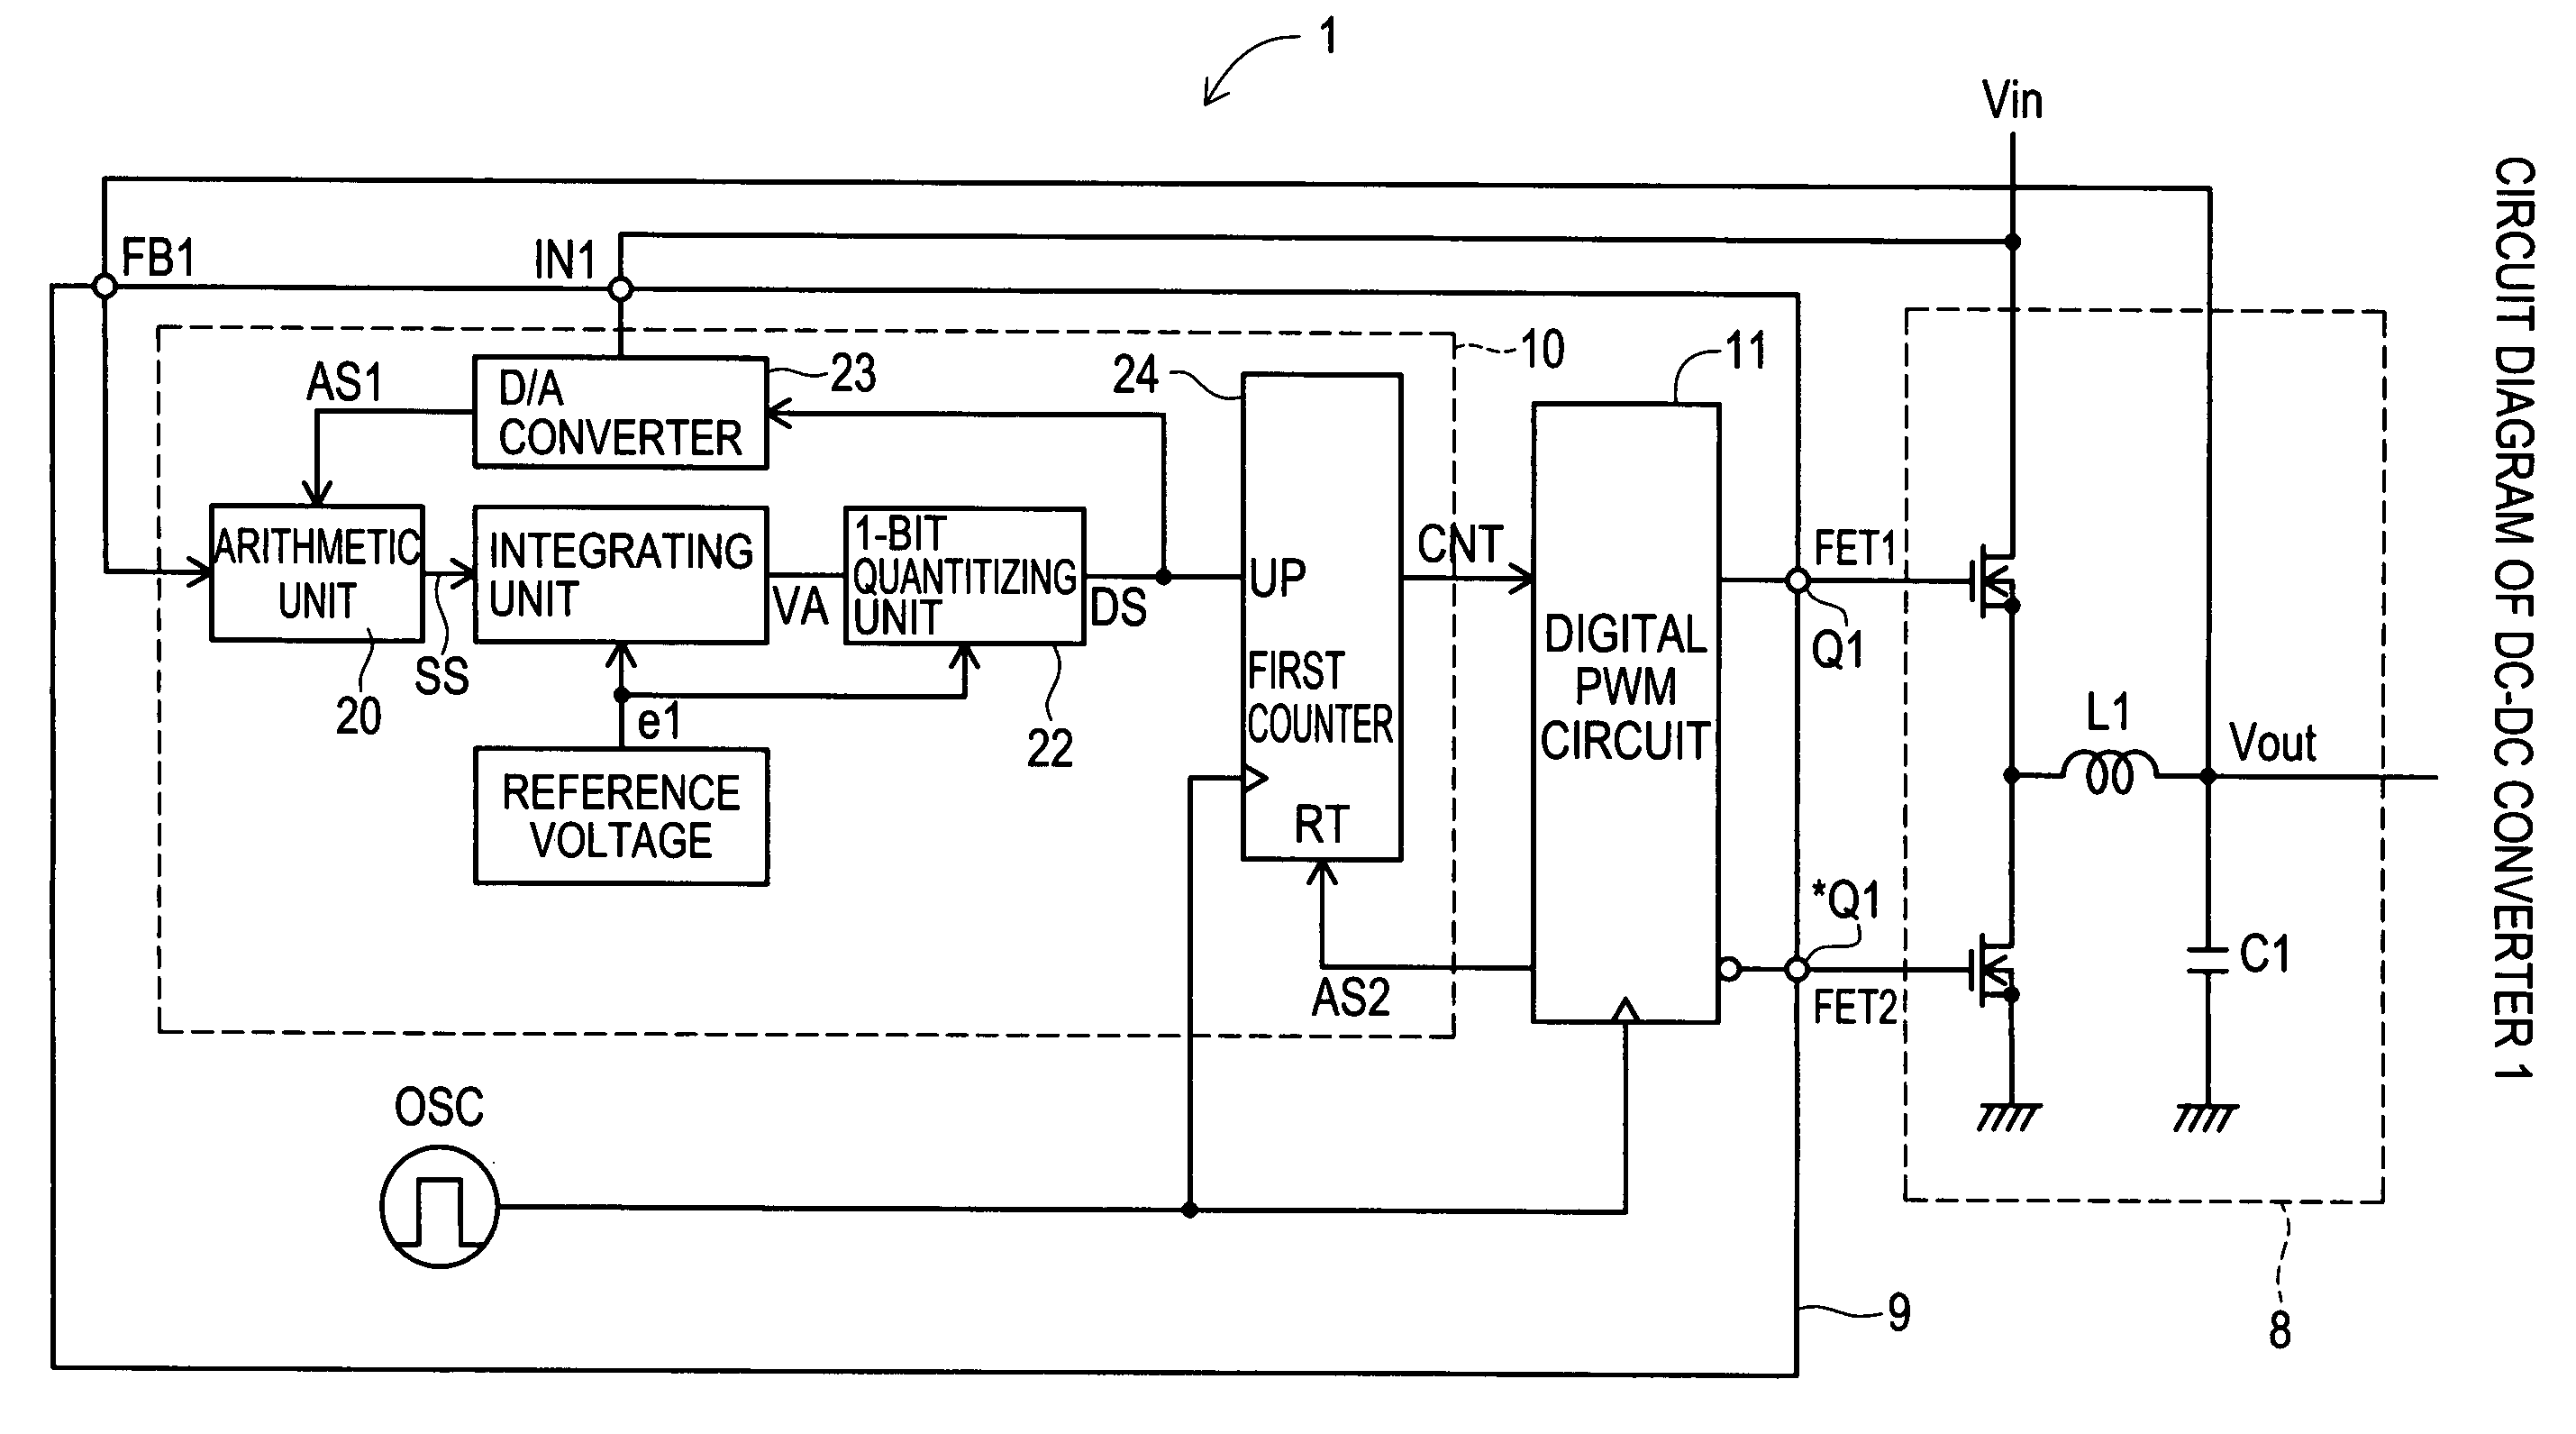 Control circuit of DC-DC converter and its control method